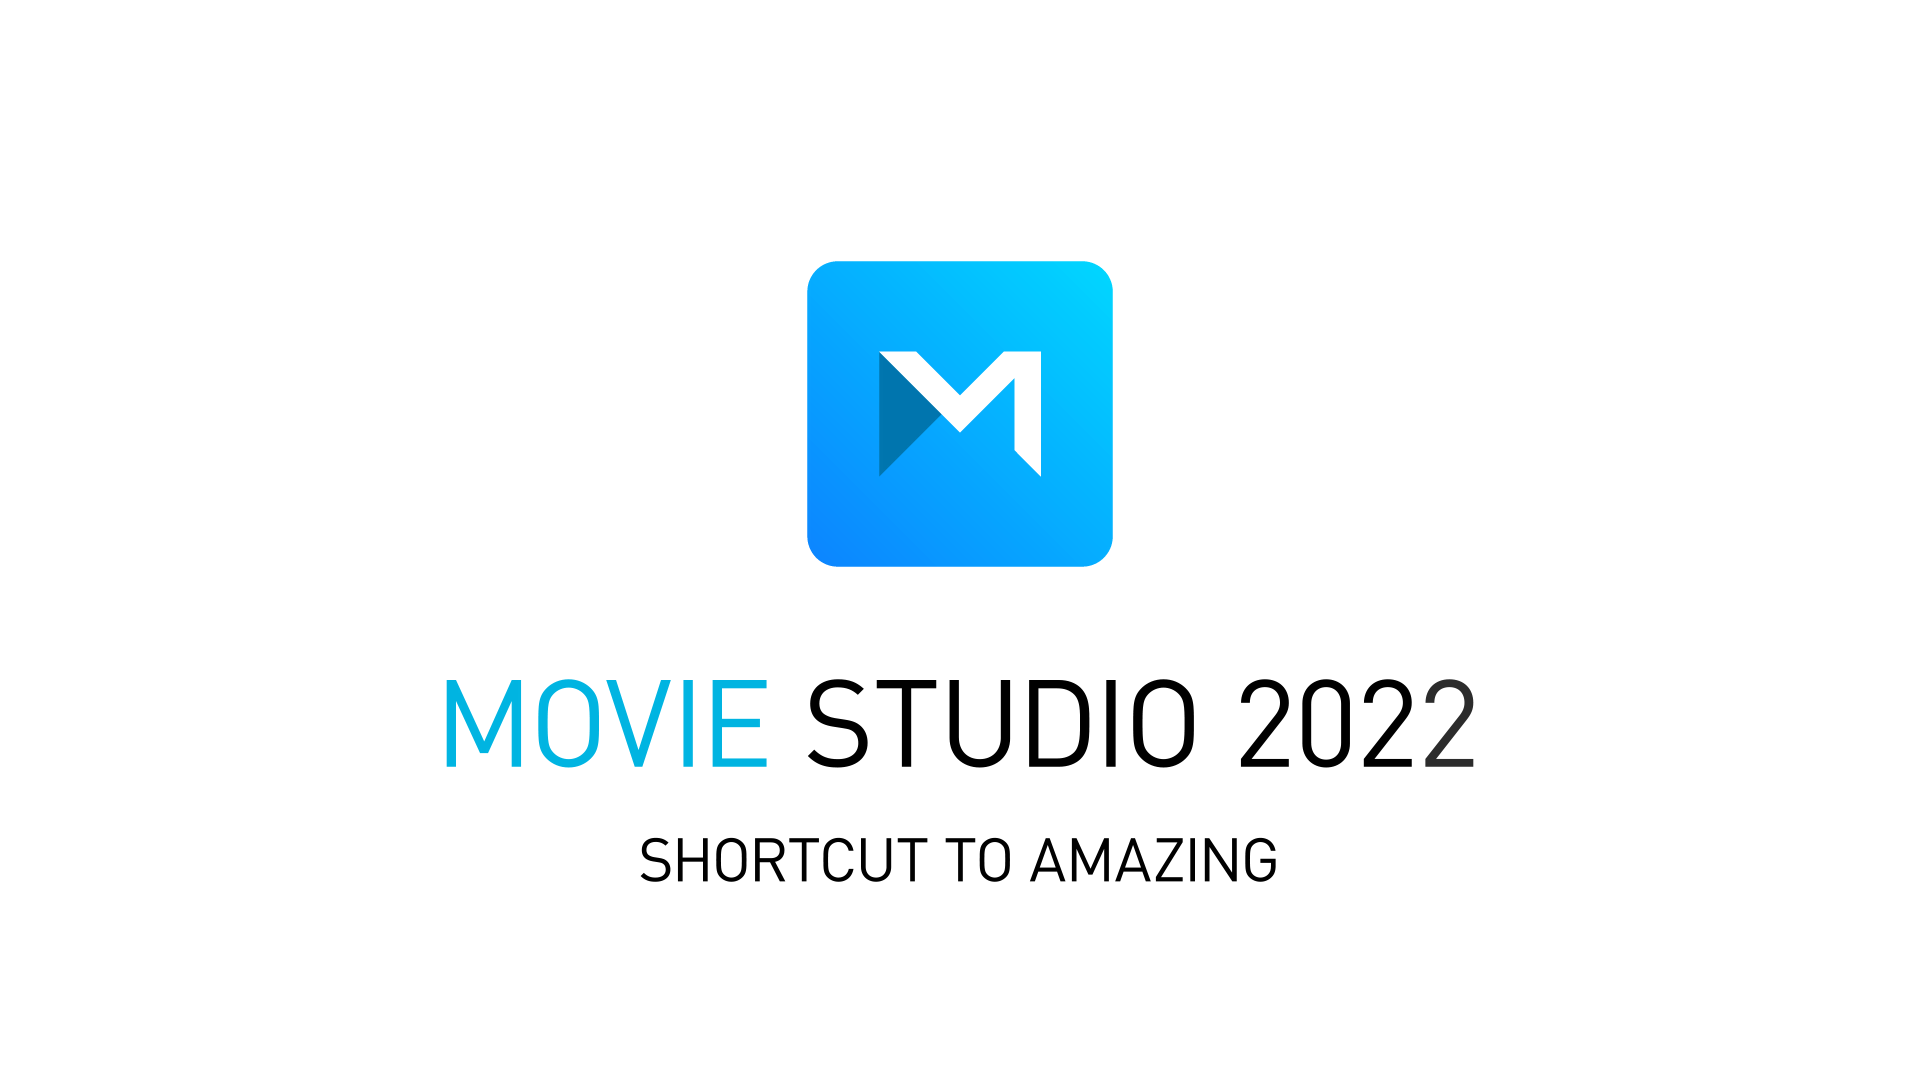 Some important news about Movie Studio